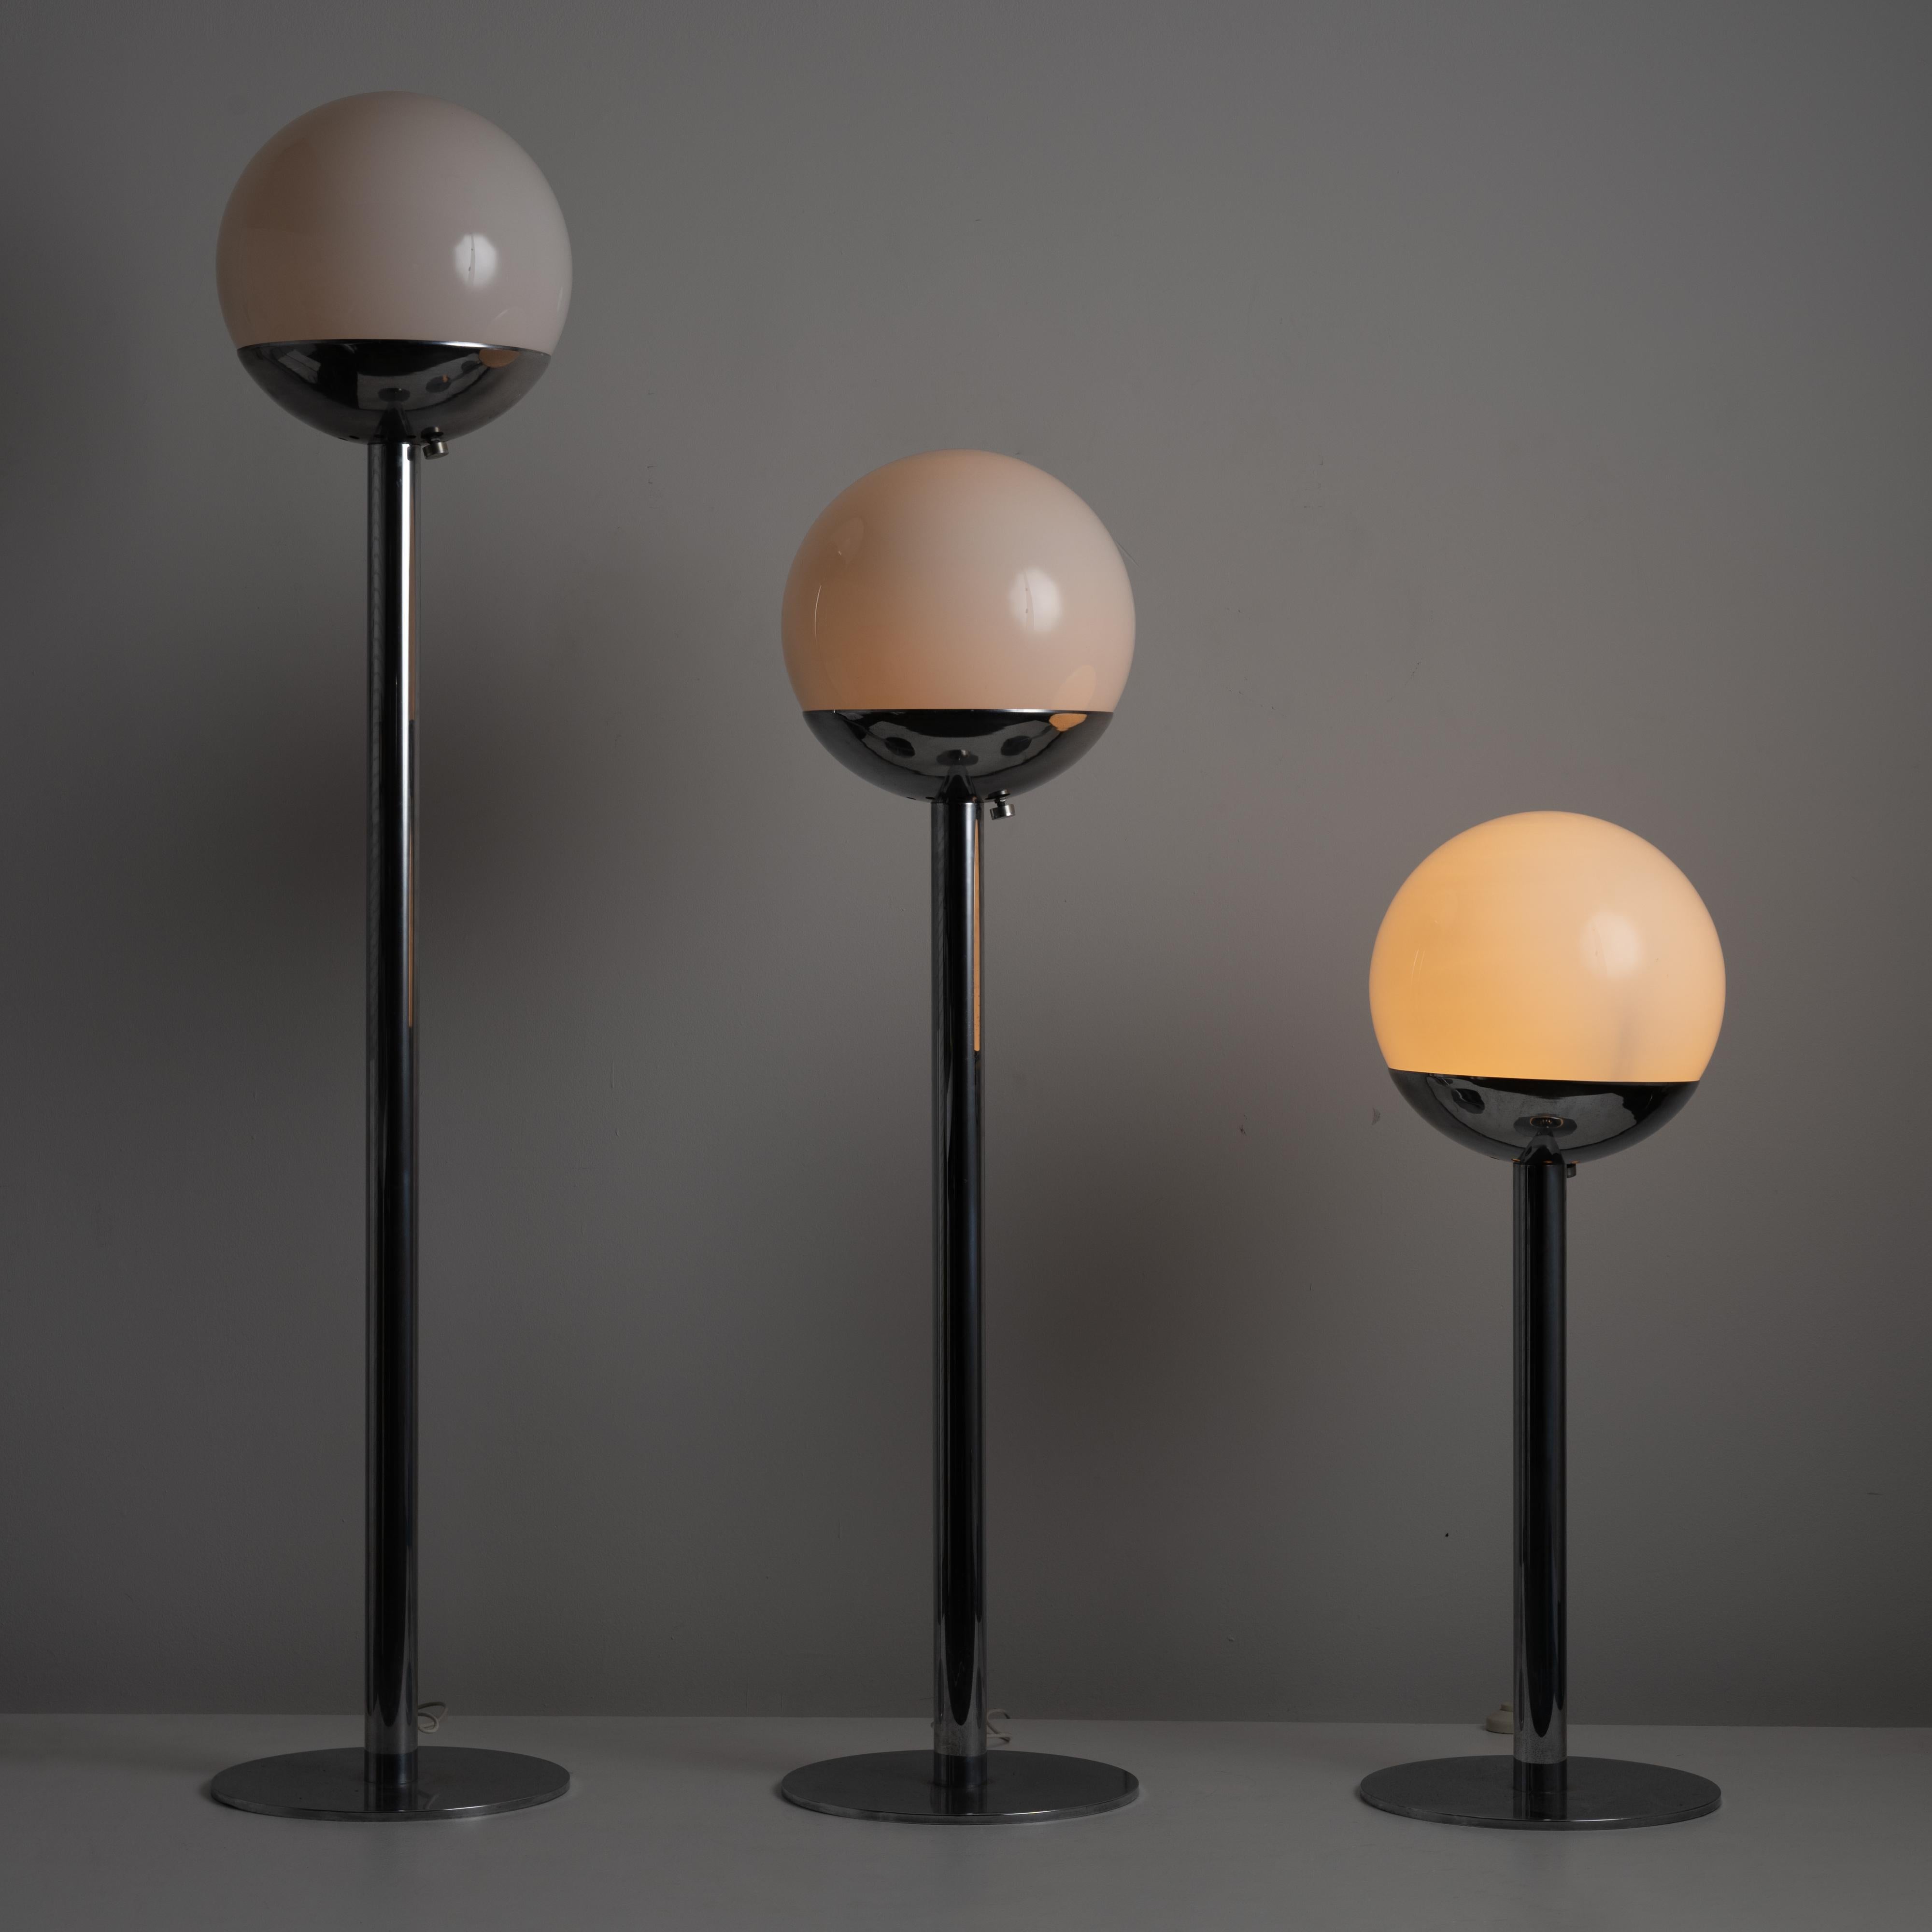 Model P428 floor lamps by Pia Guidetti Crippa for Luci Italia. Designed and manufactured in Italy, circa the 1970s. Classic, simple chrome post floor lamps in three different sizes. Heavy chrome bases hold very large opaline globes. The largest and